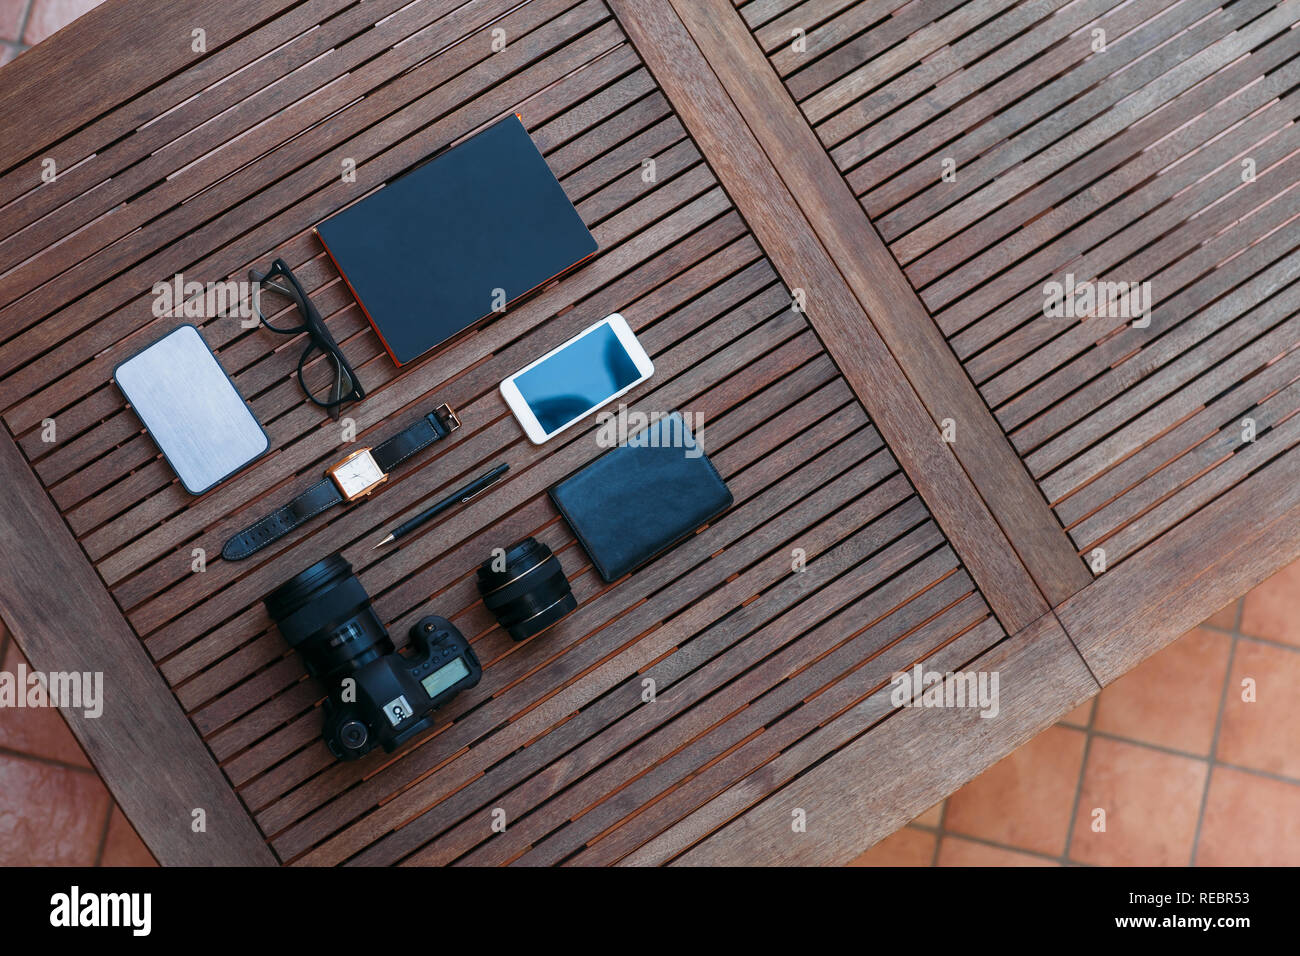 Man travel set and accessories on a wooden background. Top view Stock Photo